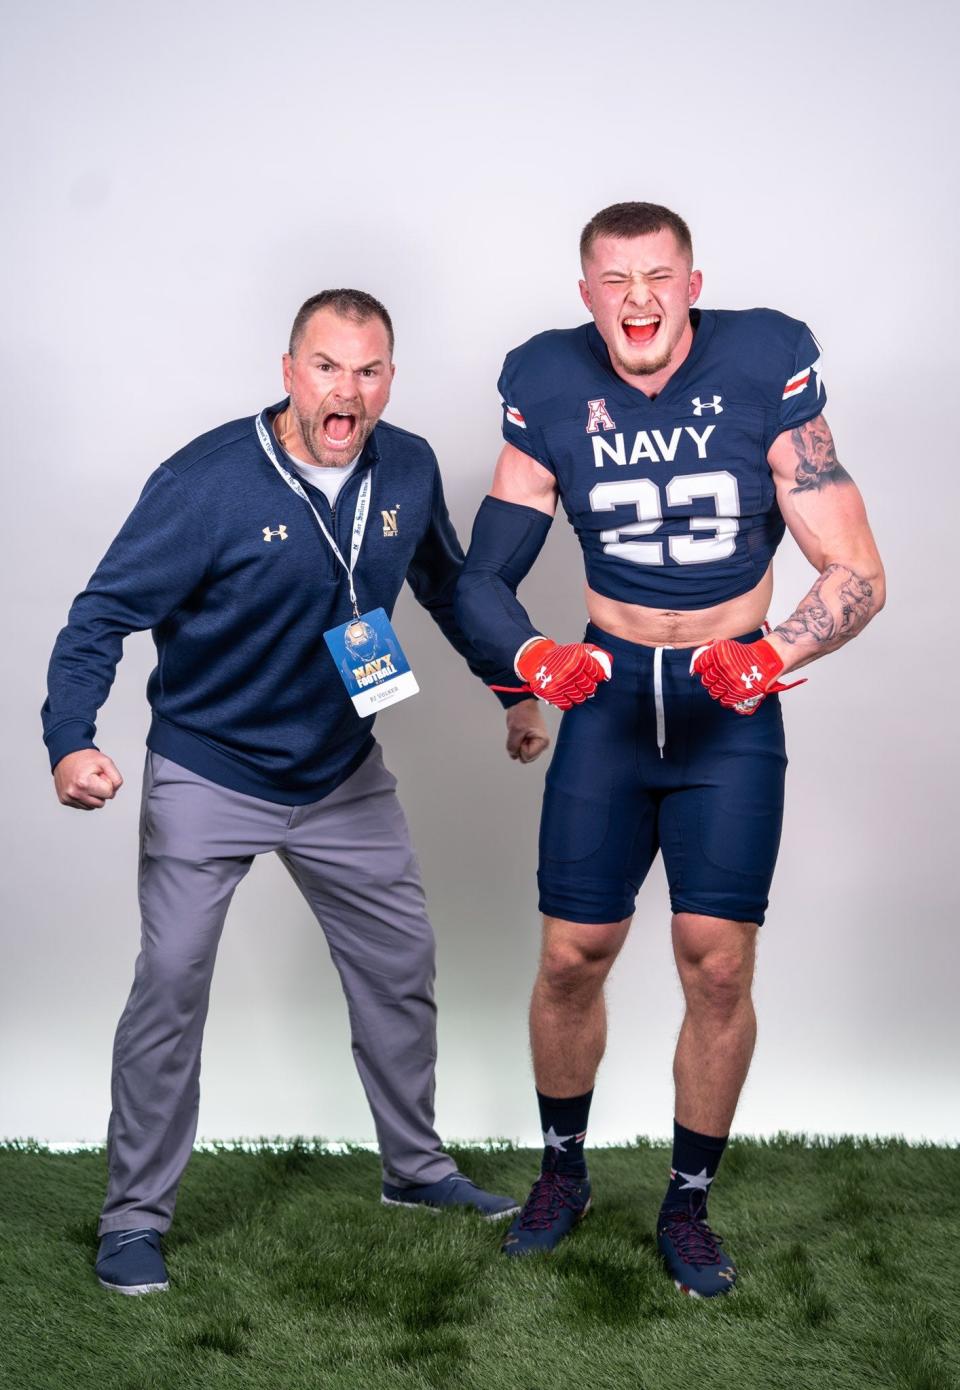 Ashland's Kadin Schmitz poses with Navy Linebackers coach PJ Volker during a recruiting visit.